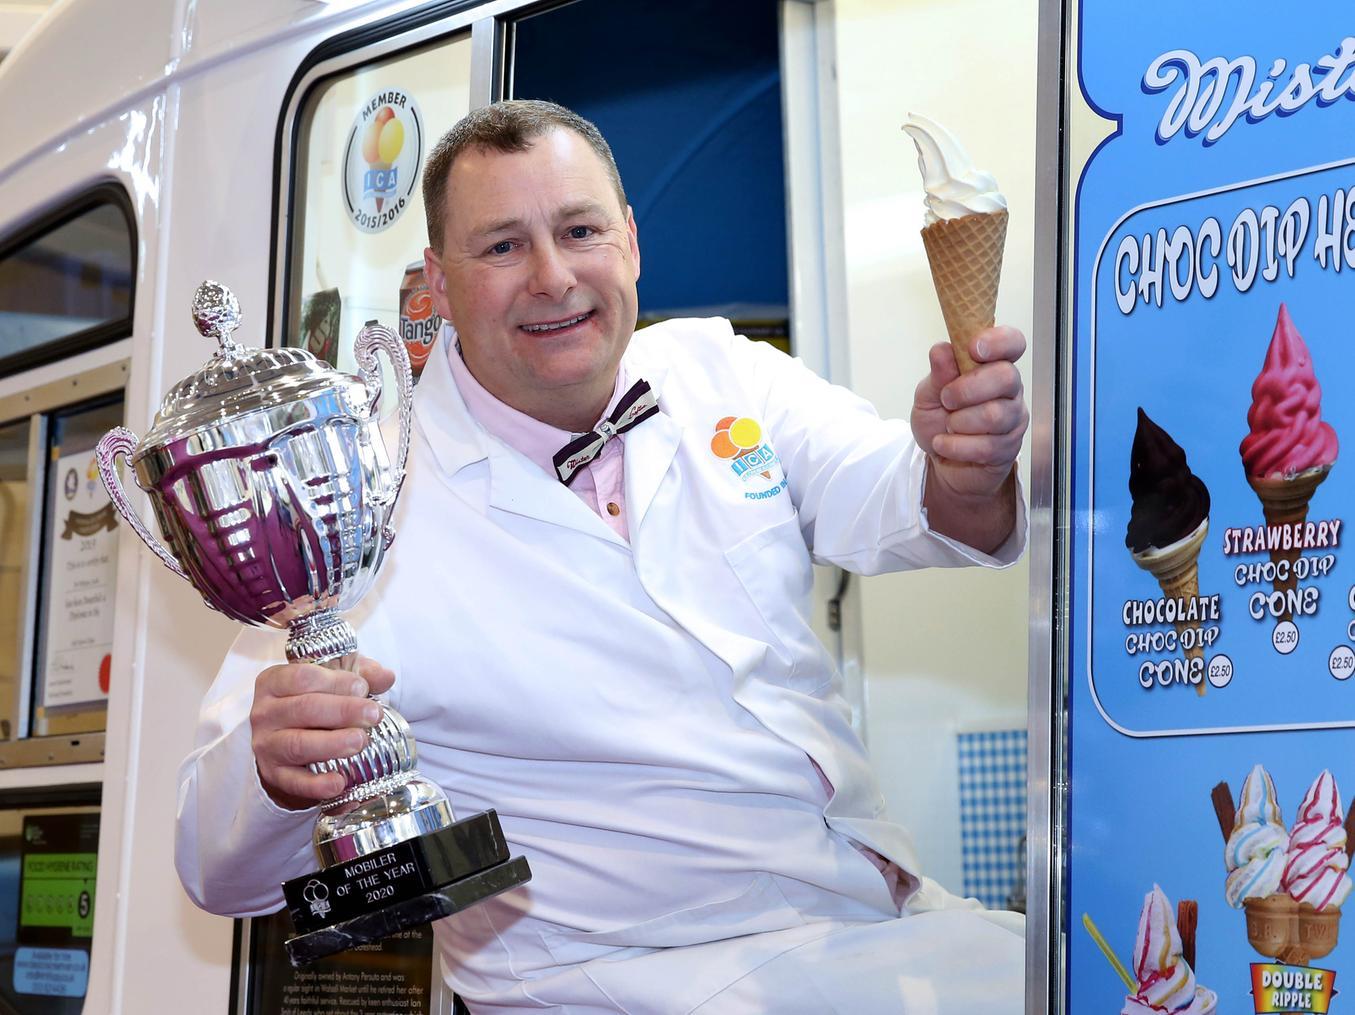 Ian Smith, 51, of Mr Whippy Leeds has won 'Ice Cream Van of the Year 2020' in a national competition.